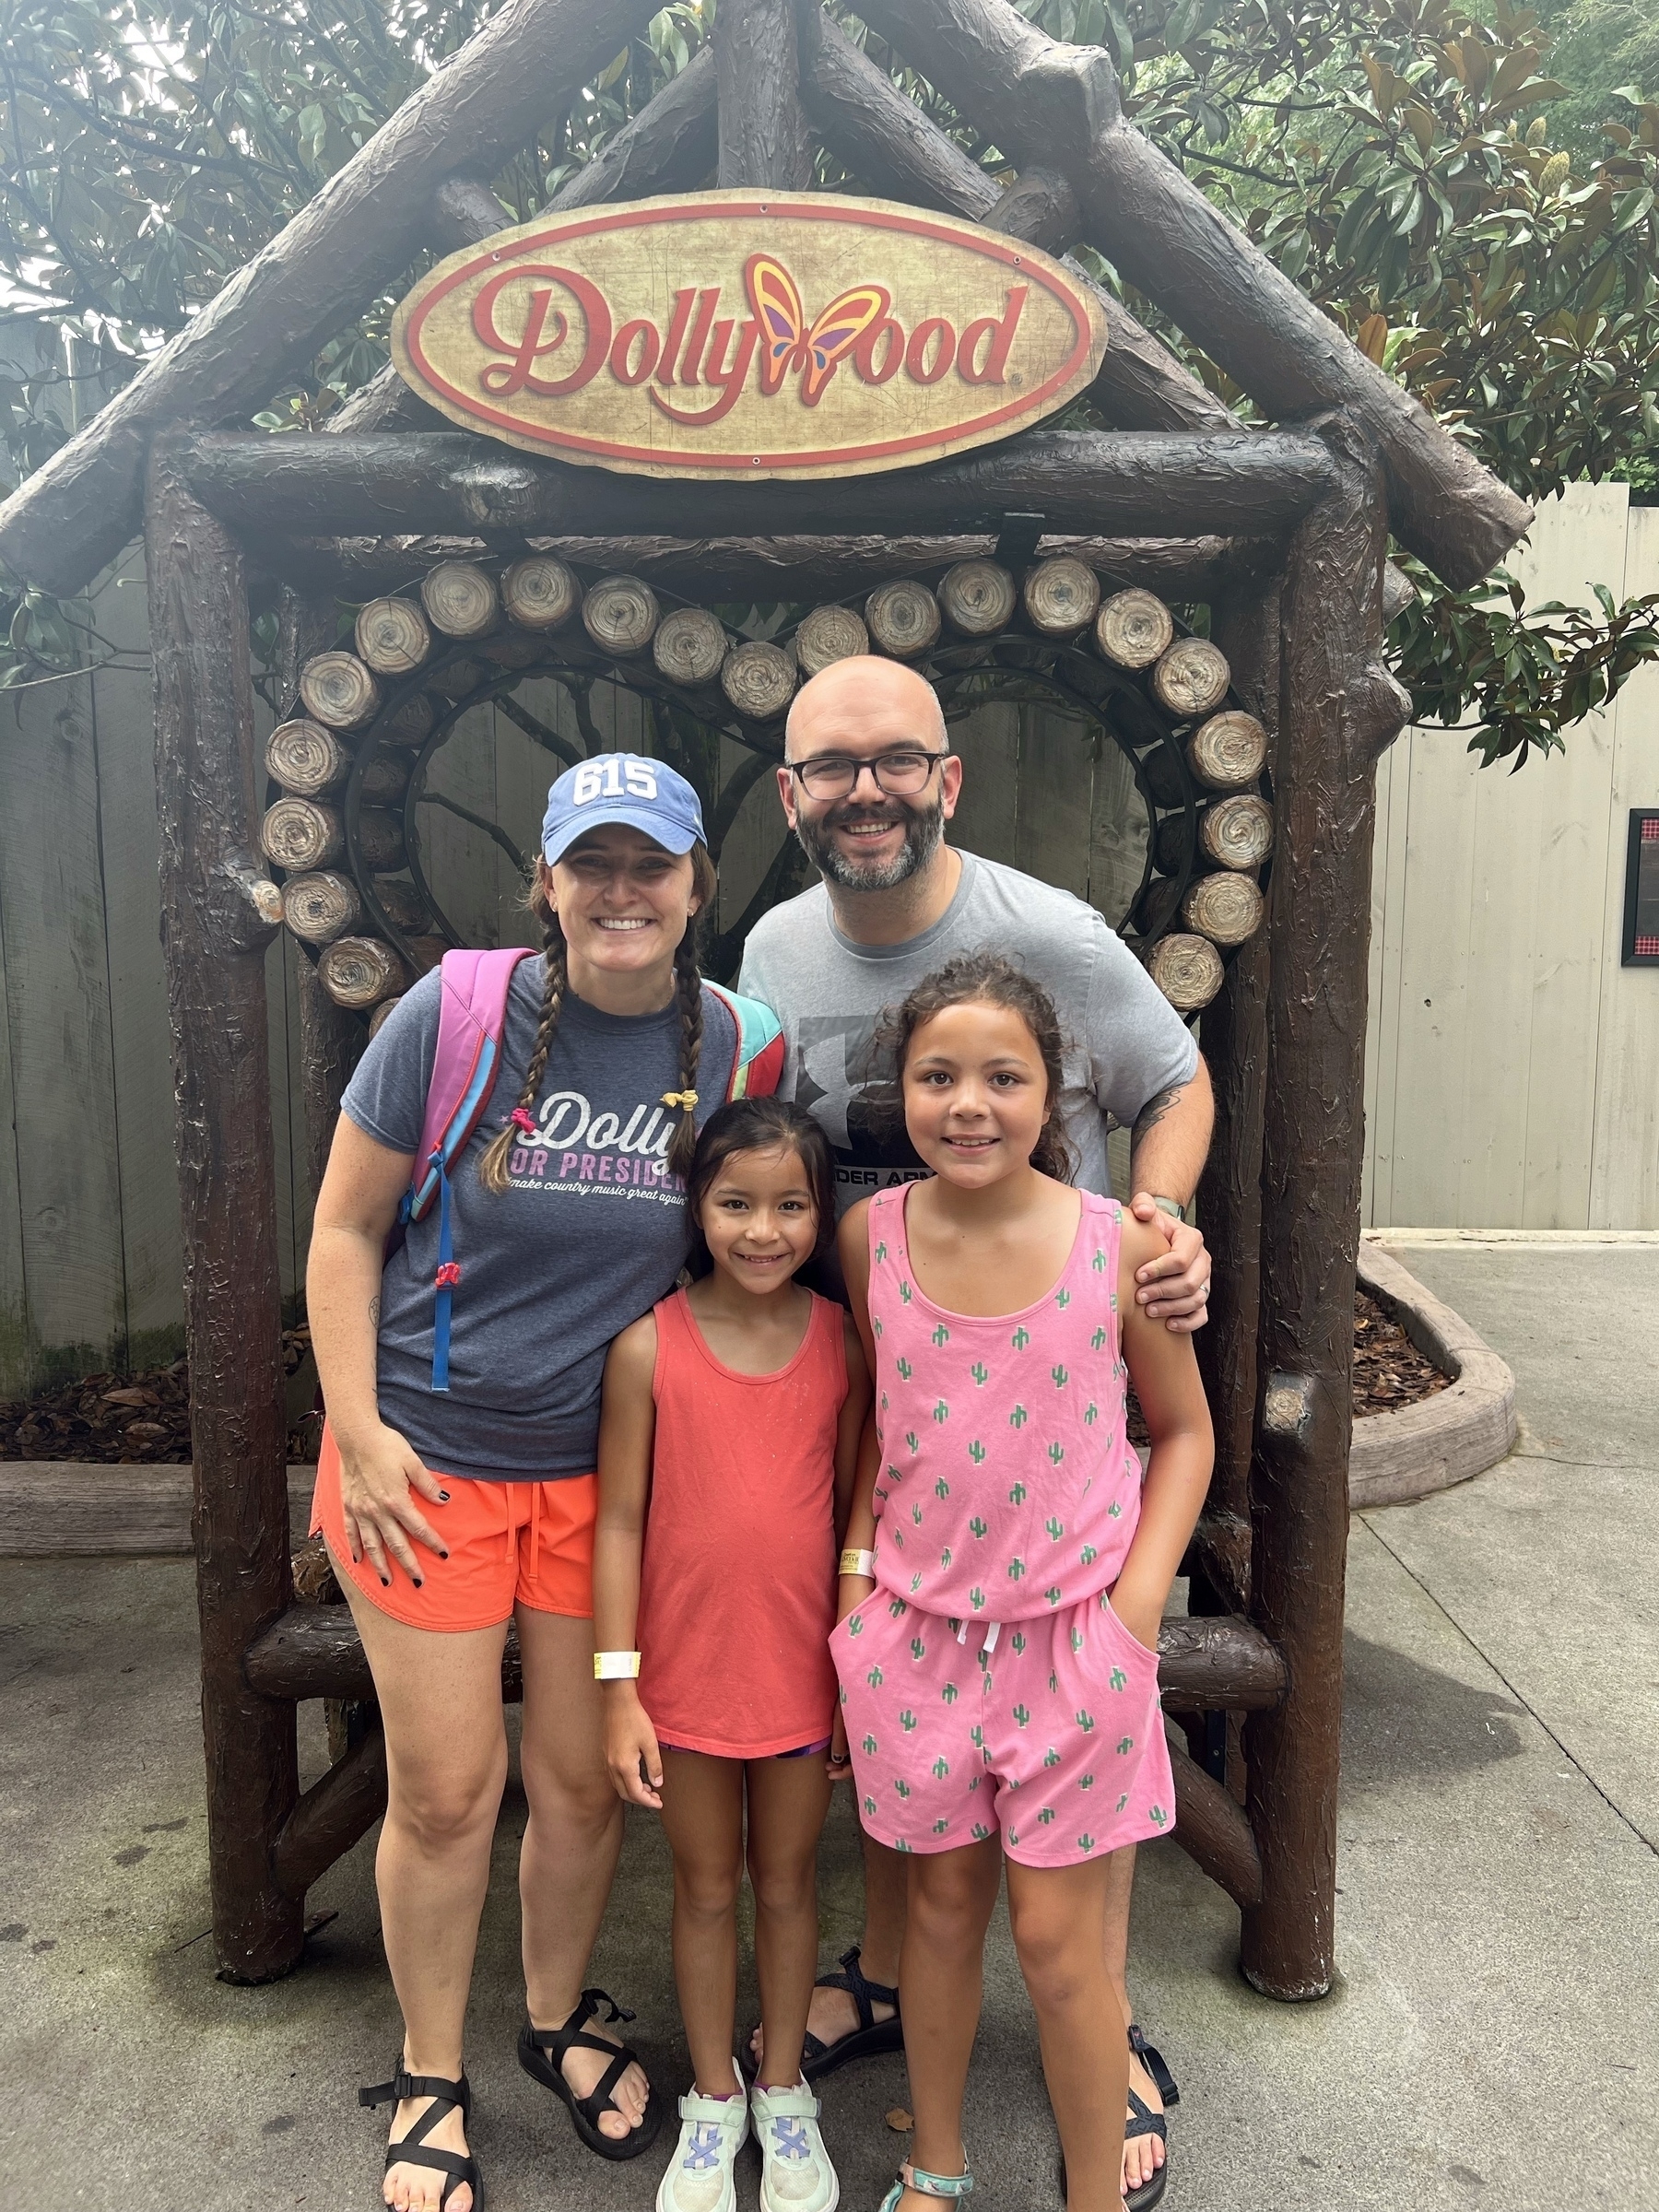 Family in front of wooden structure with Dollywood sign